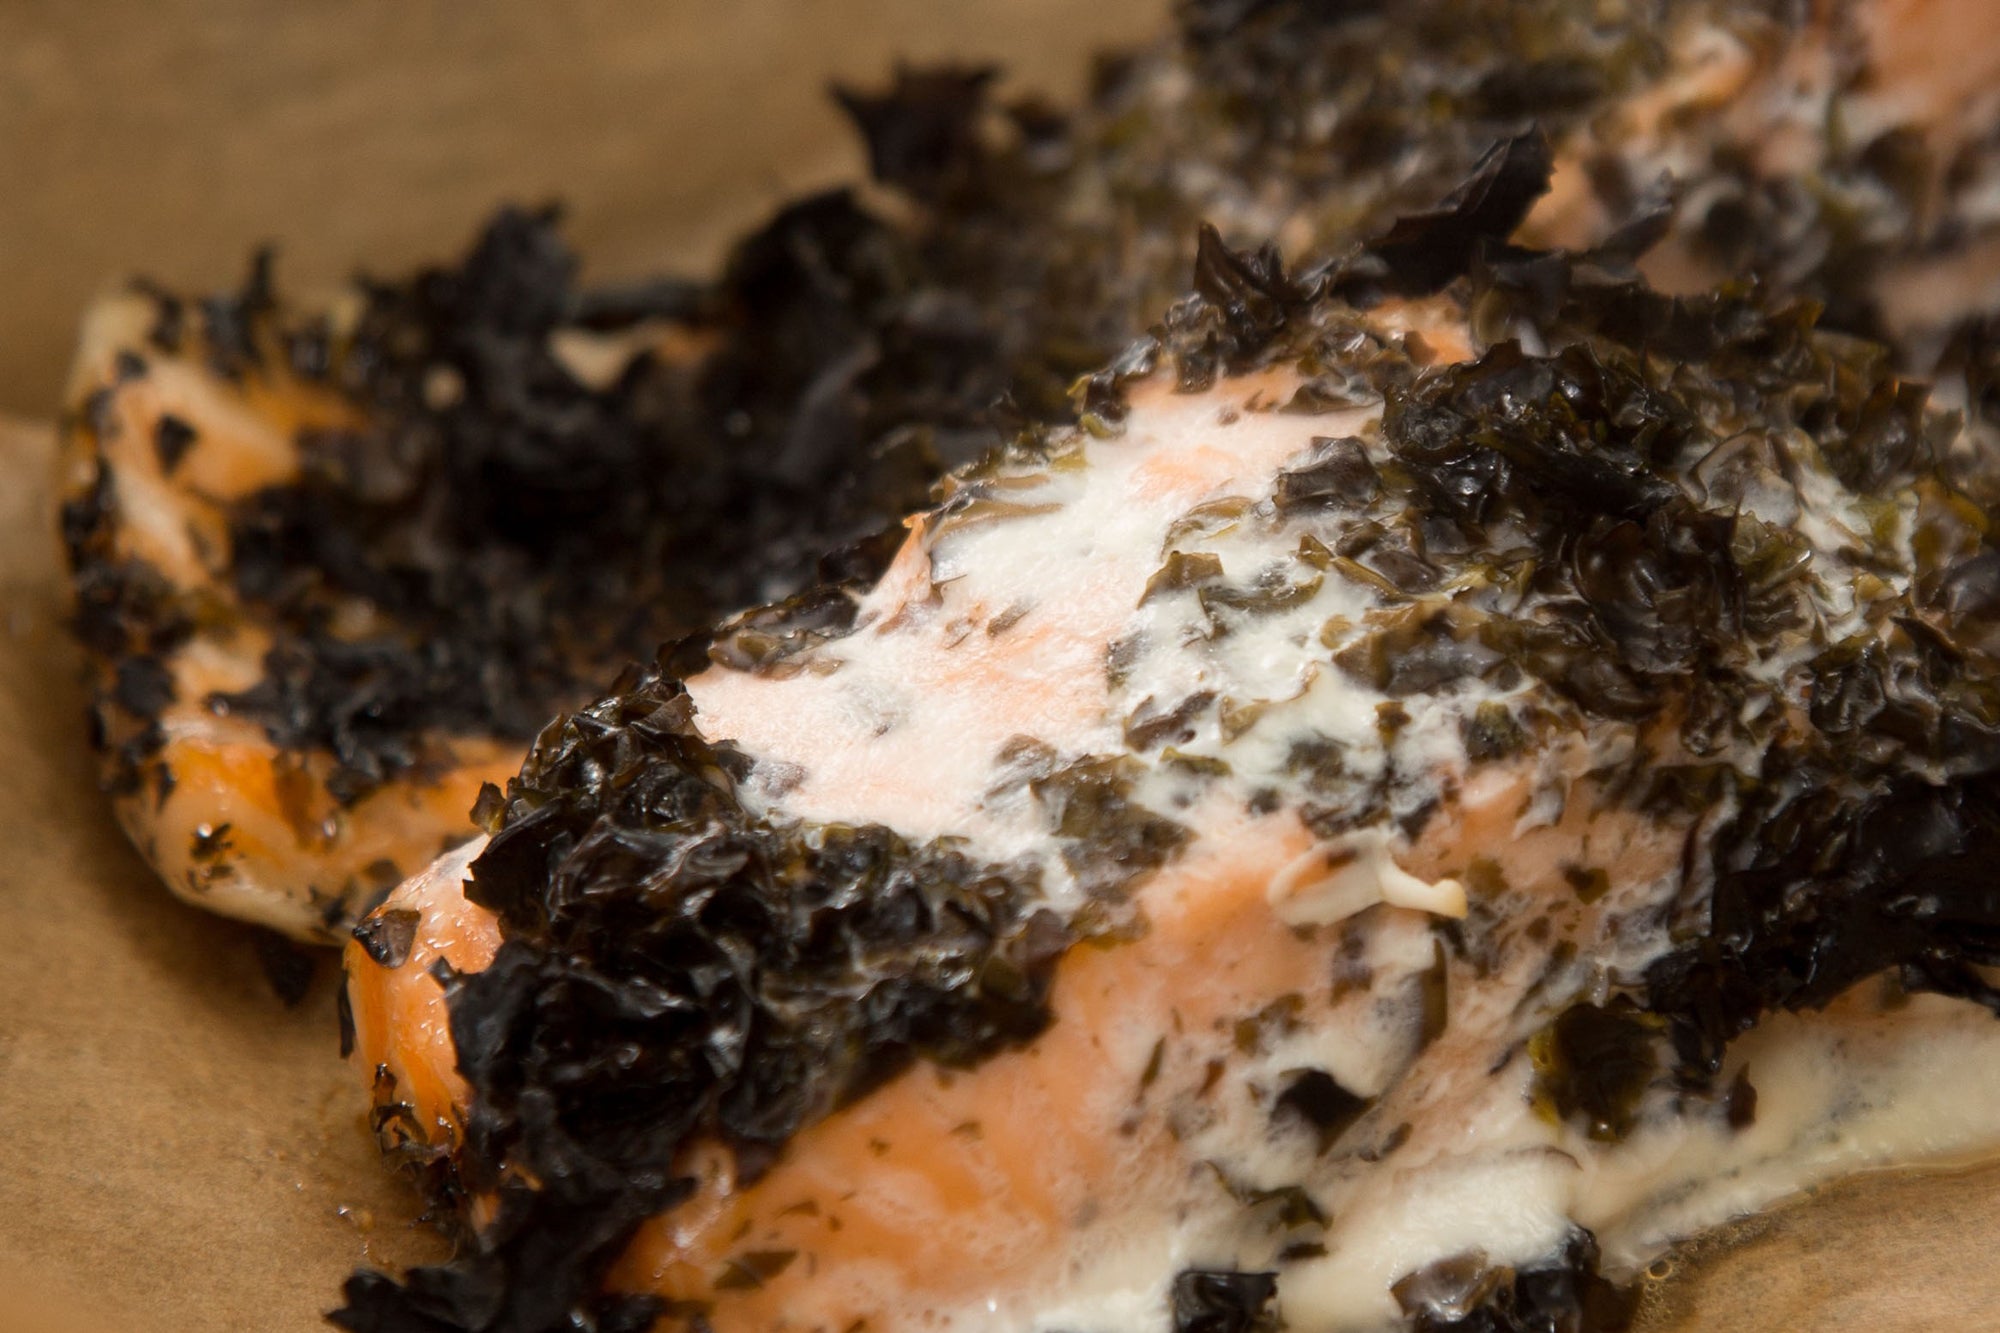 Baked Salmon with Dried Laver Seaweed